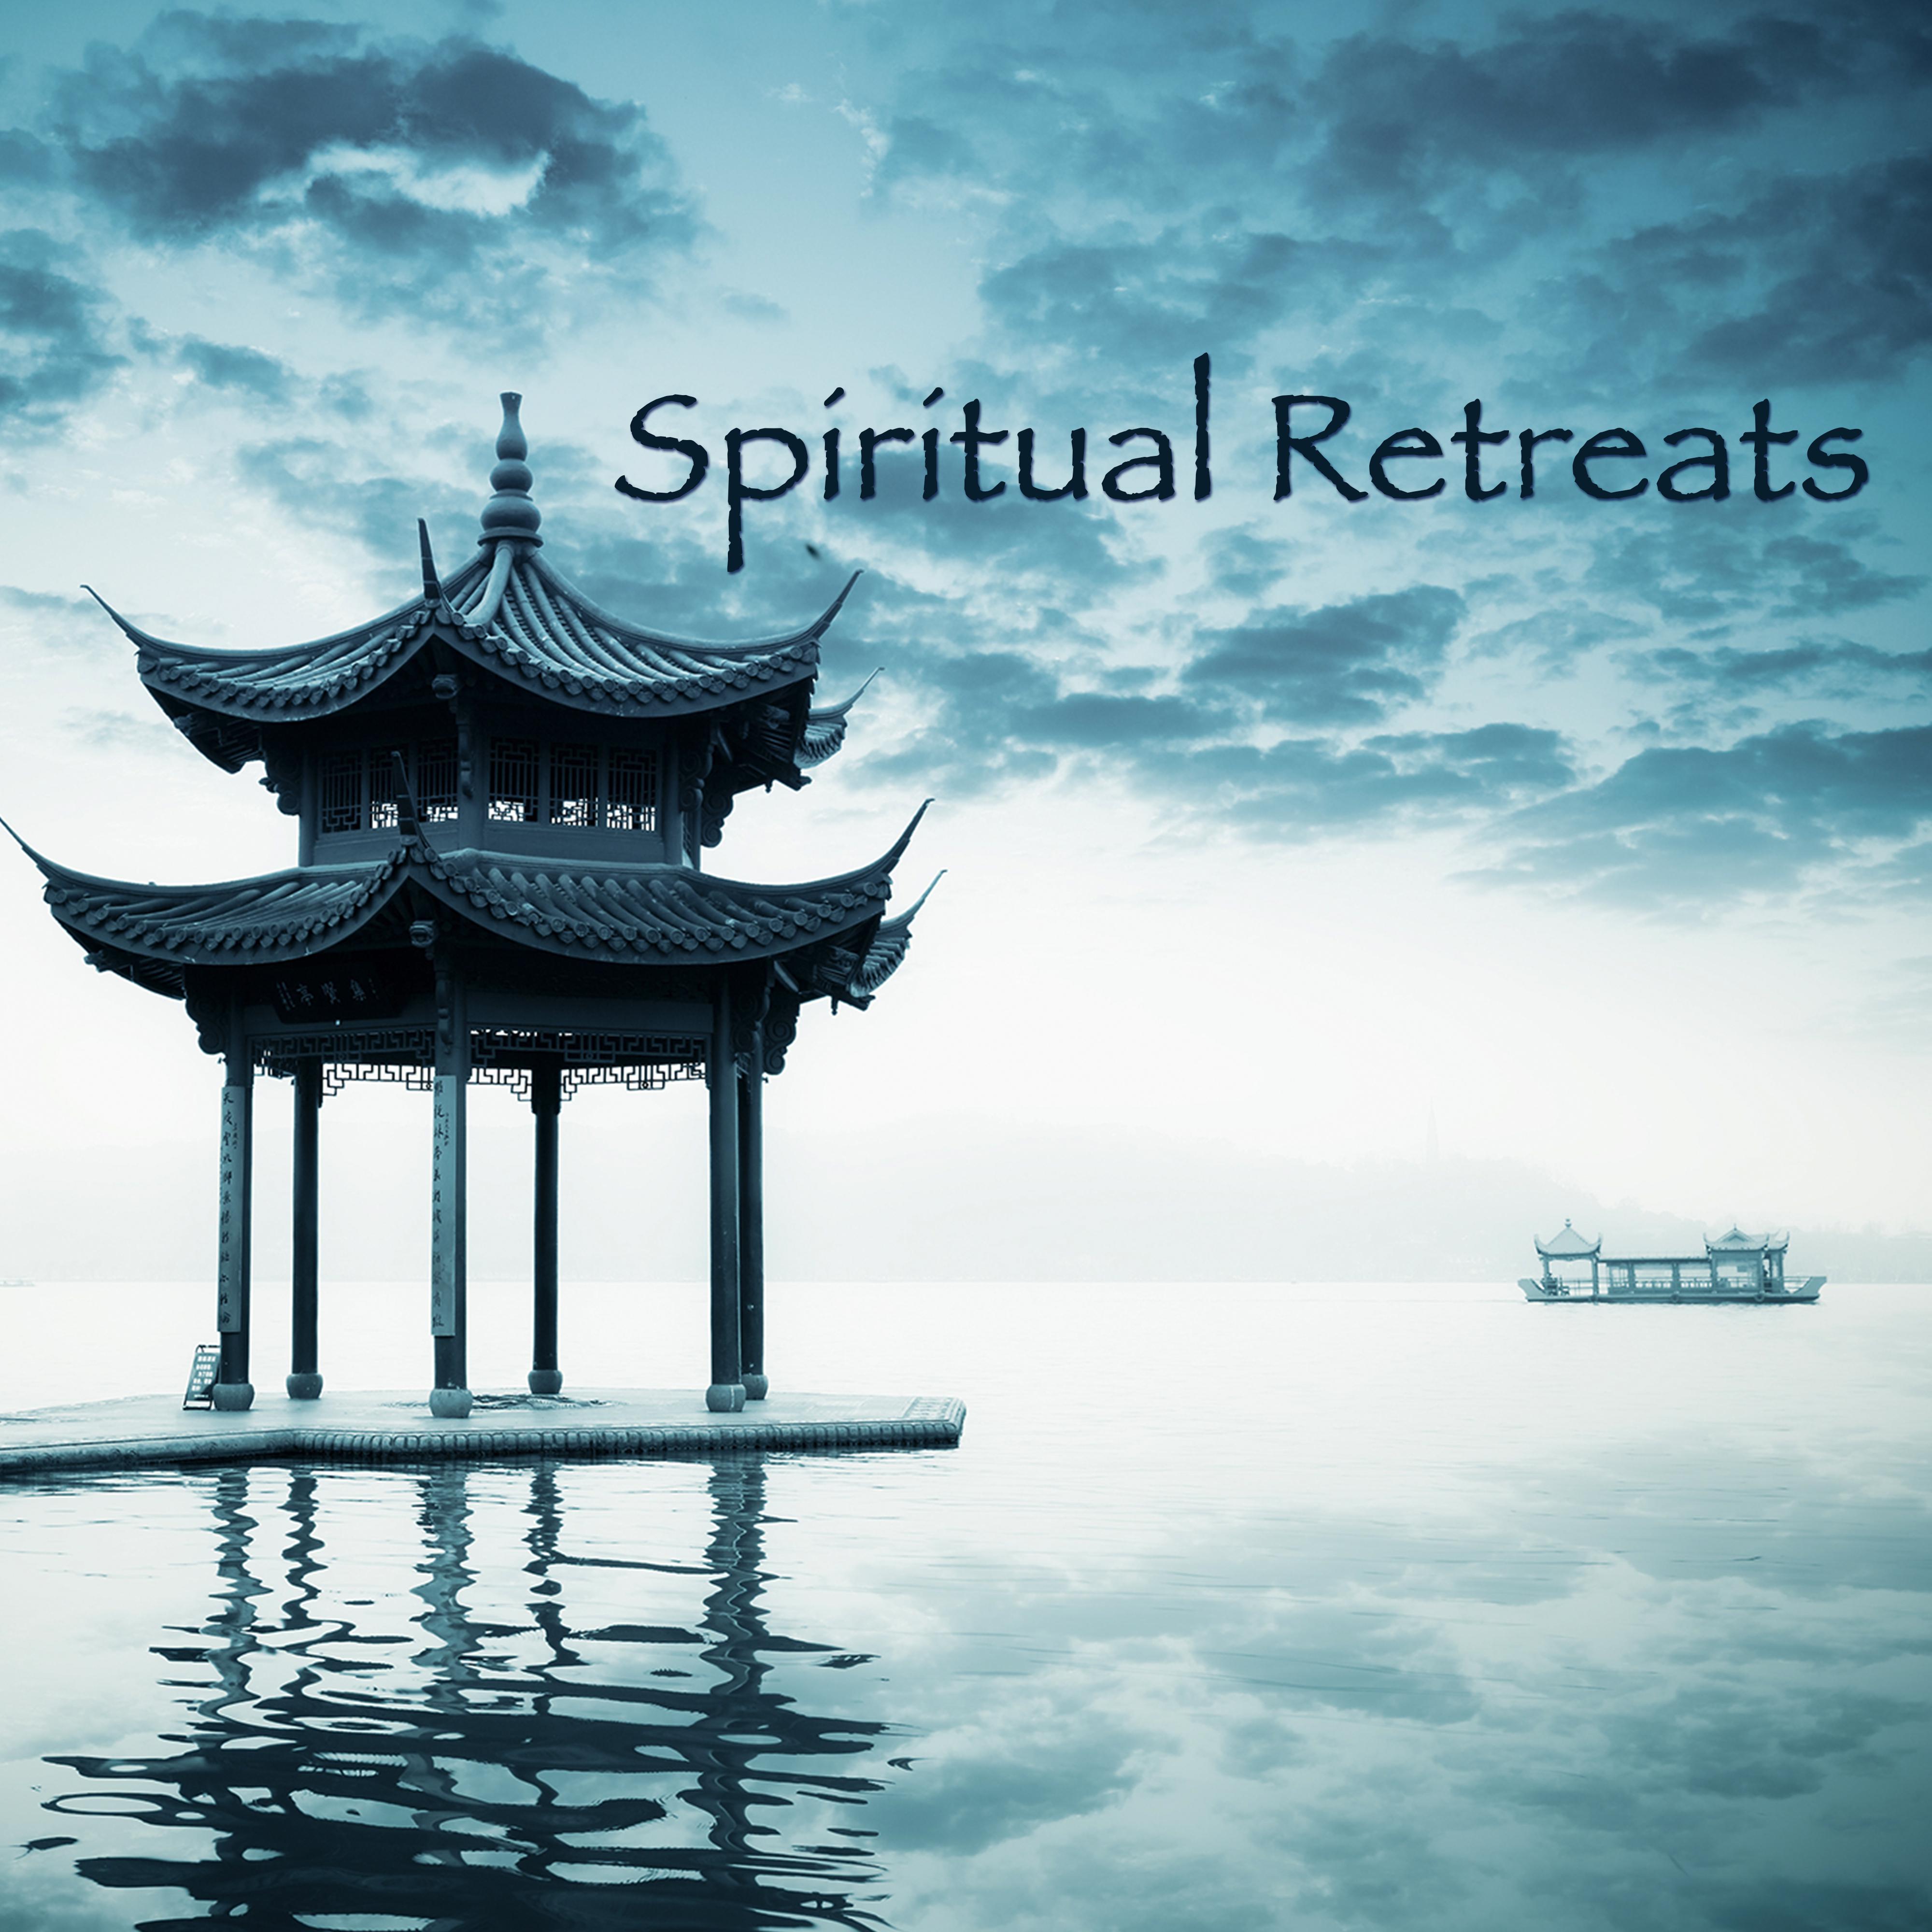 Spiritual Retreats – Yoga Space New Age Relaxing Music, Meditate & Relax in Yoga Retreats Quiet Place